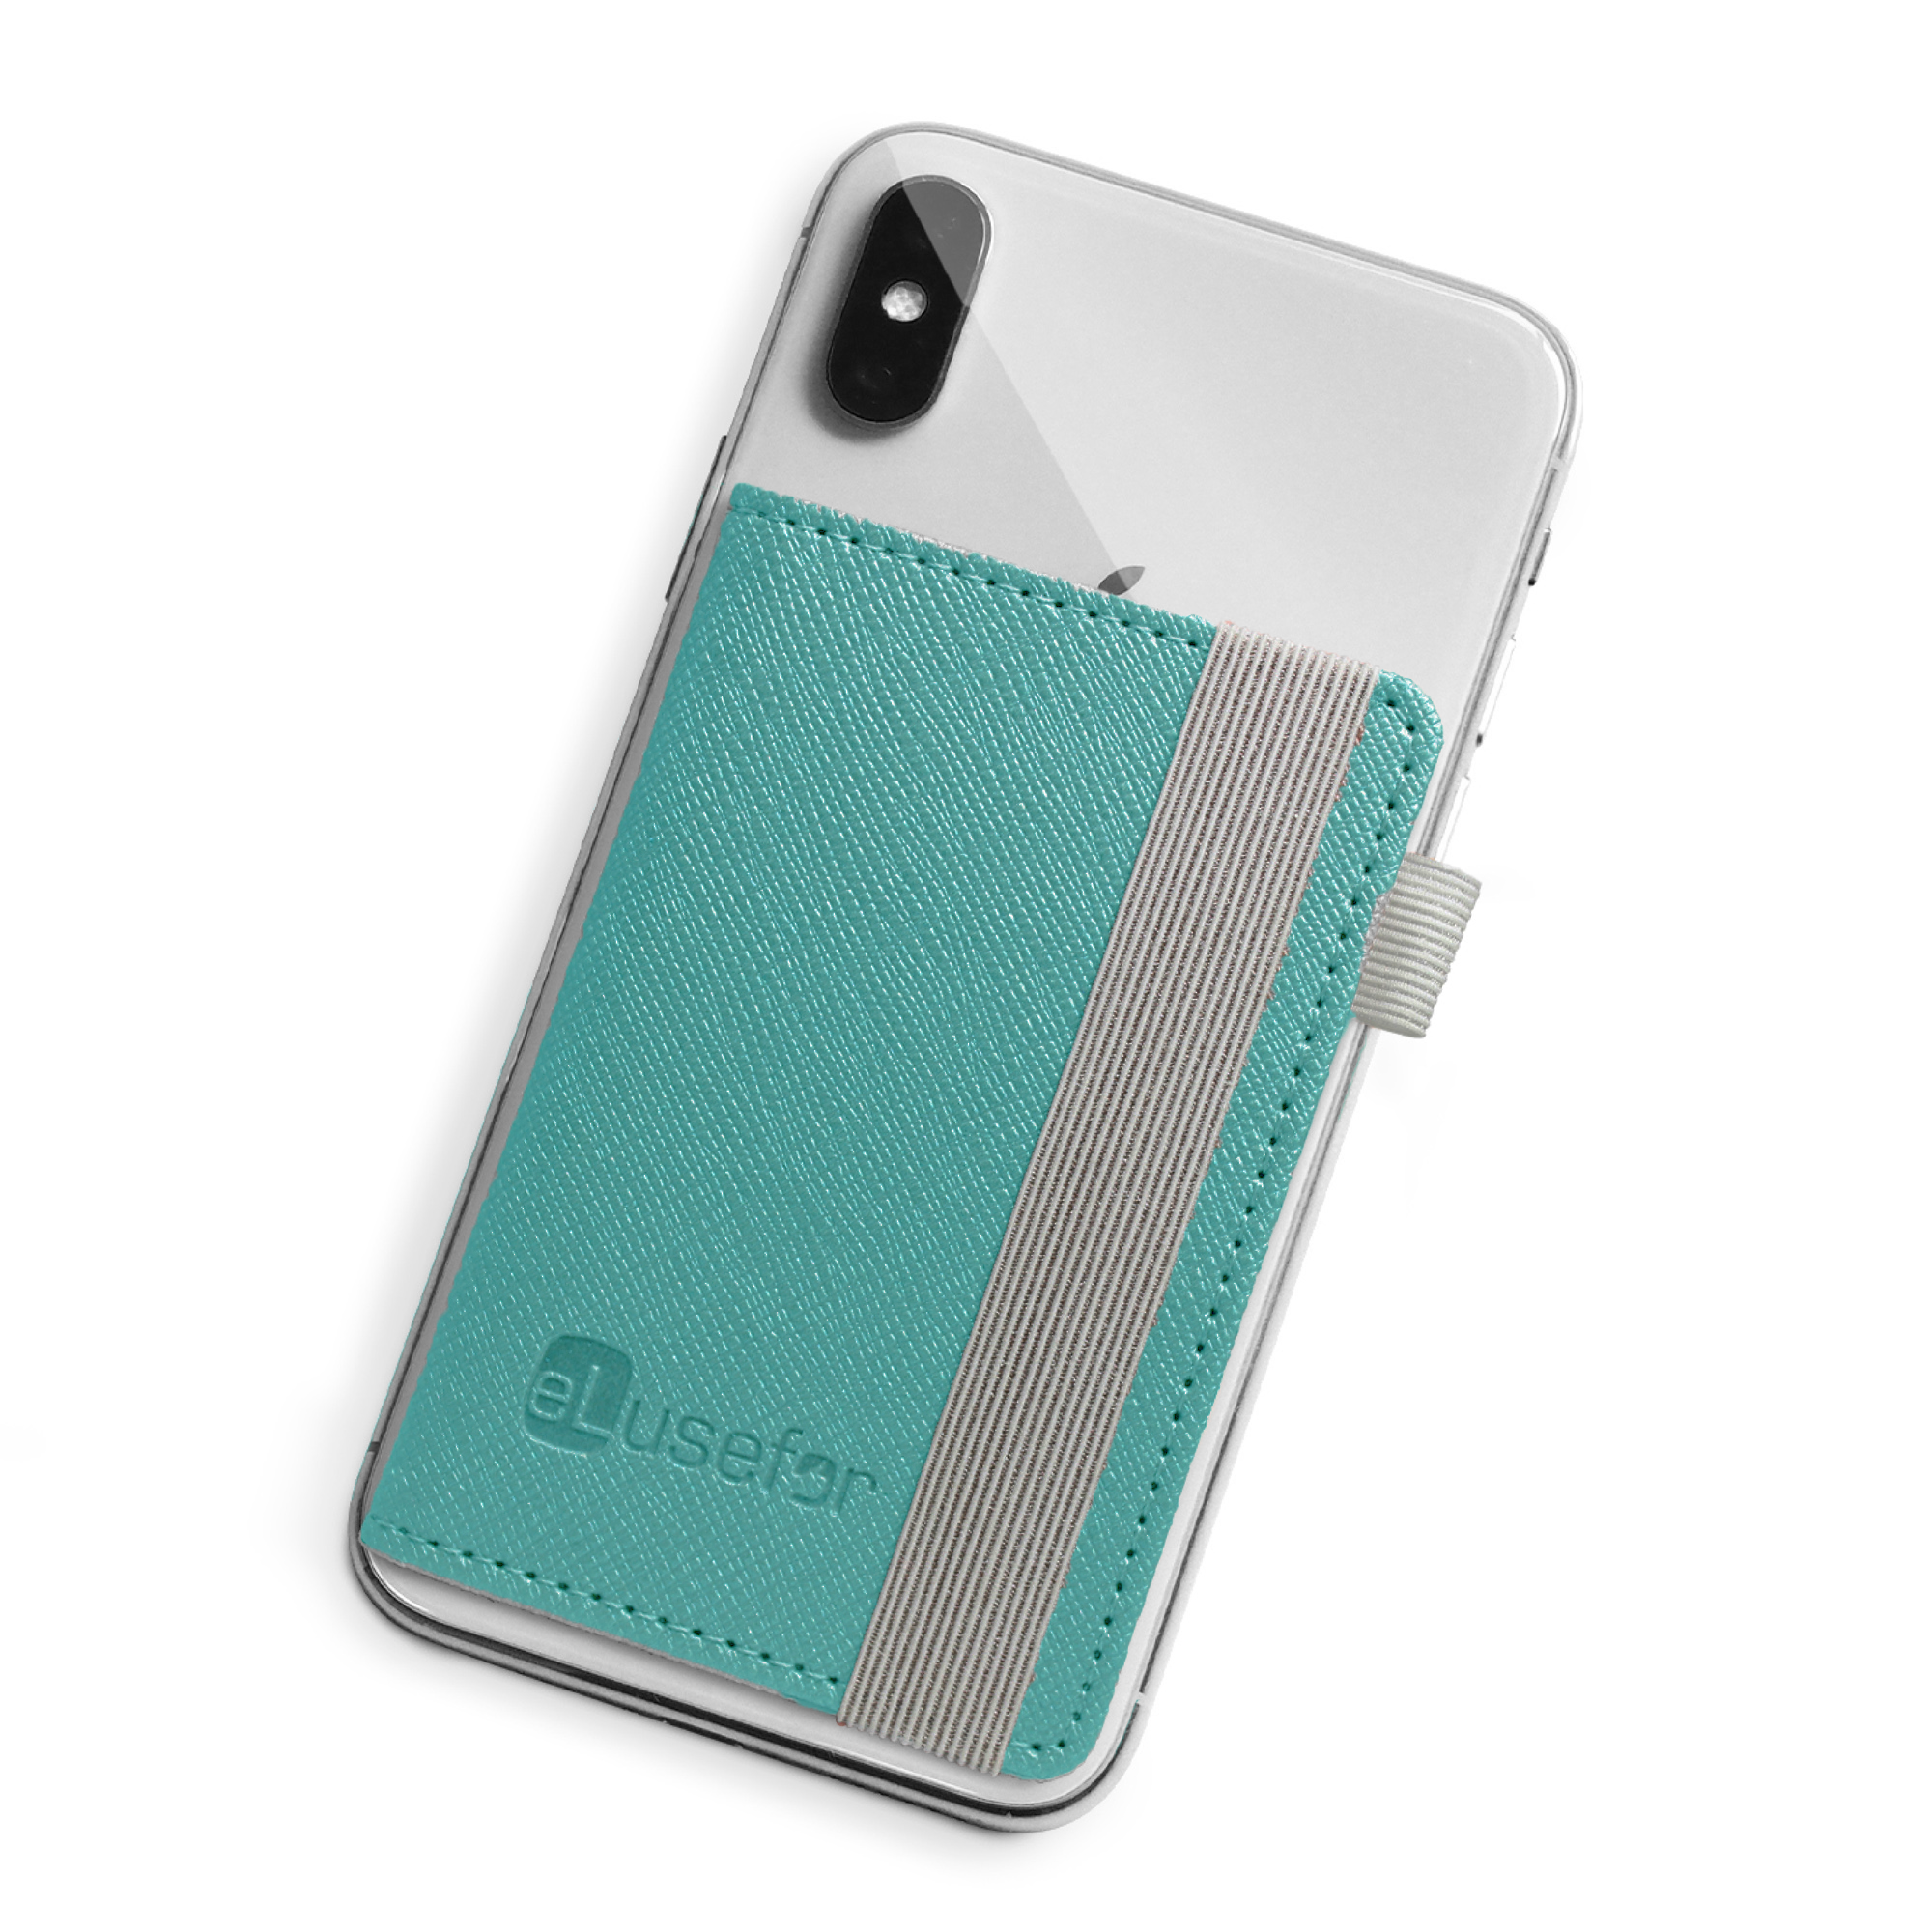 Evelyn Stick-On Phone Wallet for 6 Cards, Cash, IDs and more